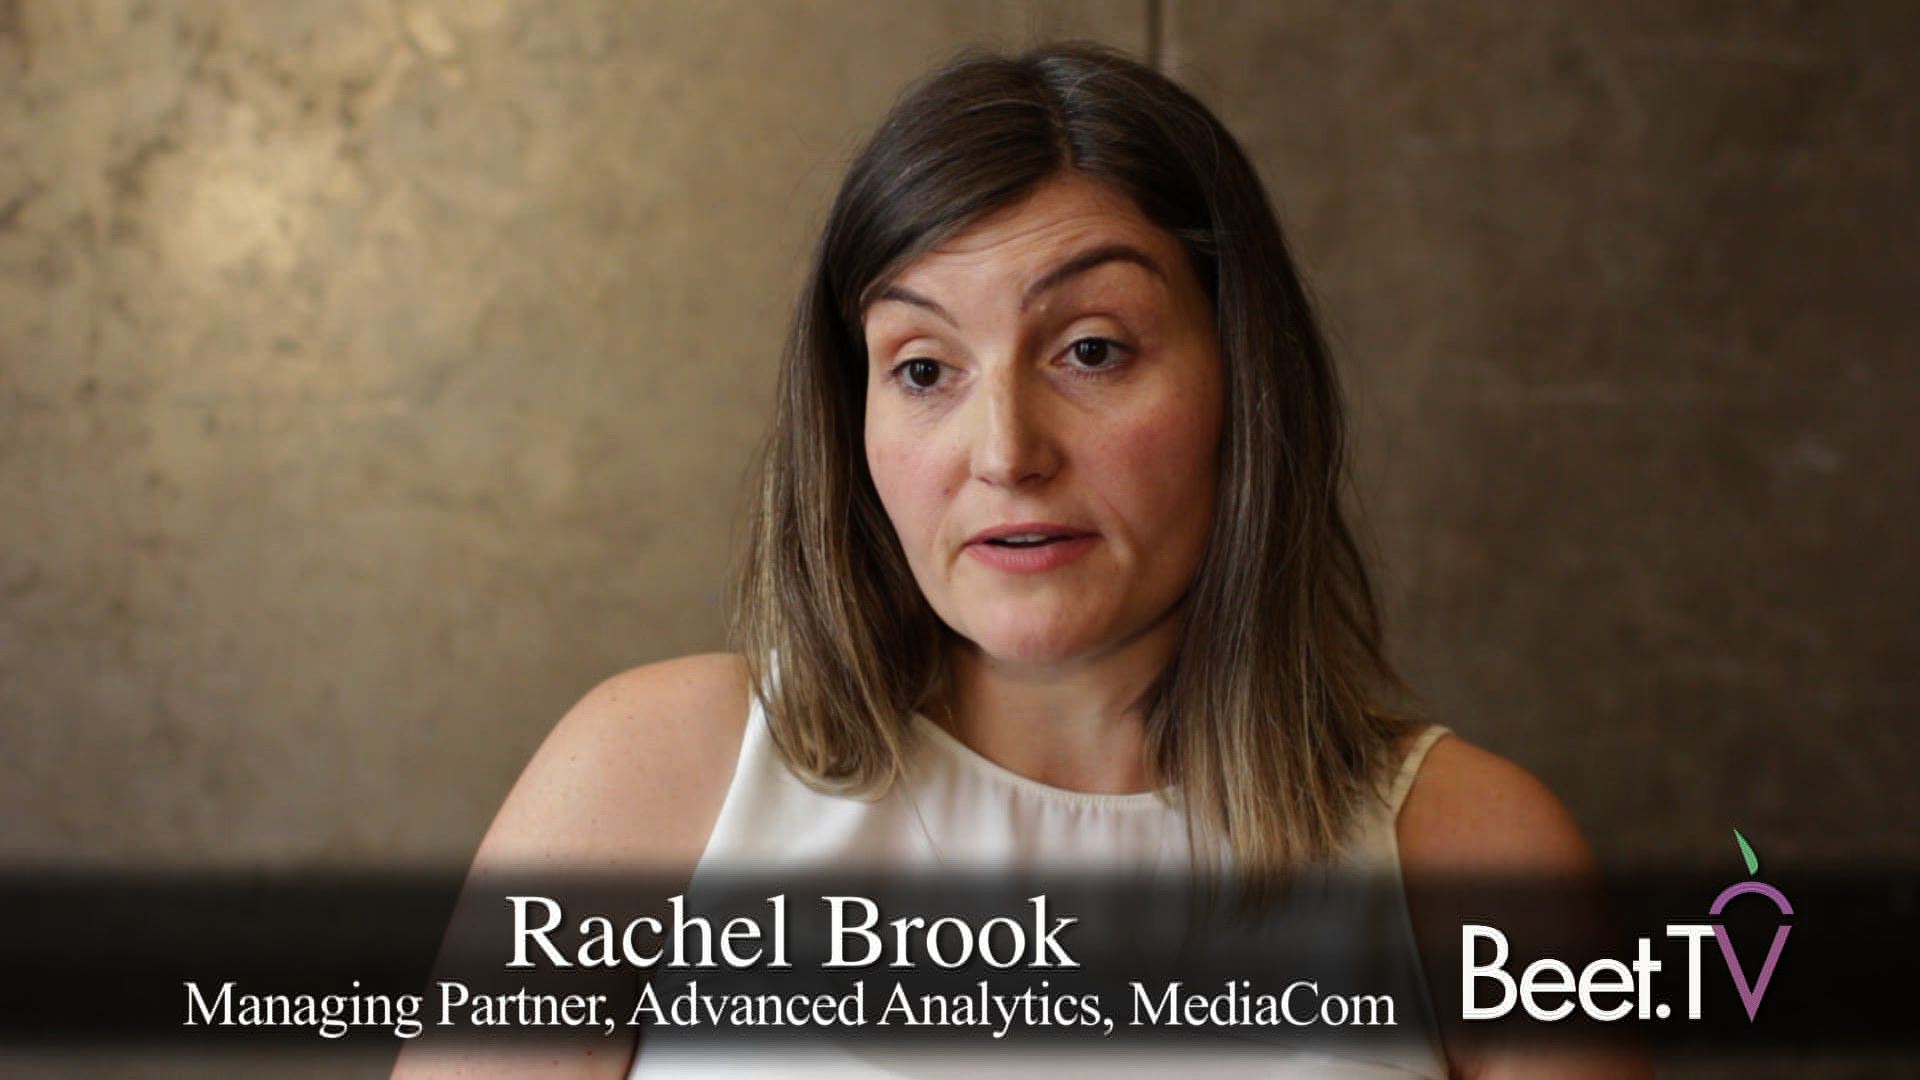 MediaCom’s Brook Uses Mobile To Prove Consumer Footfall